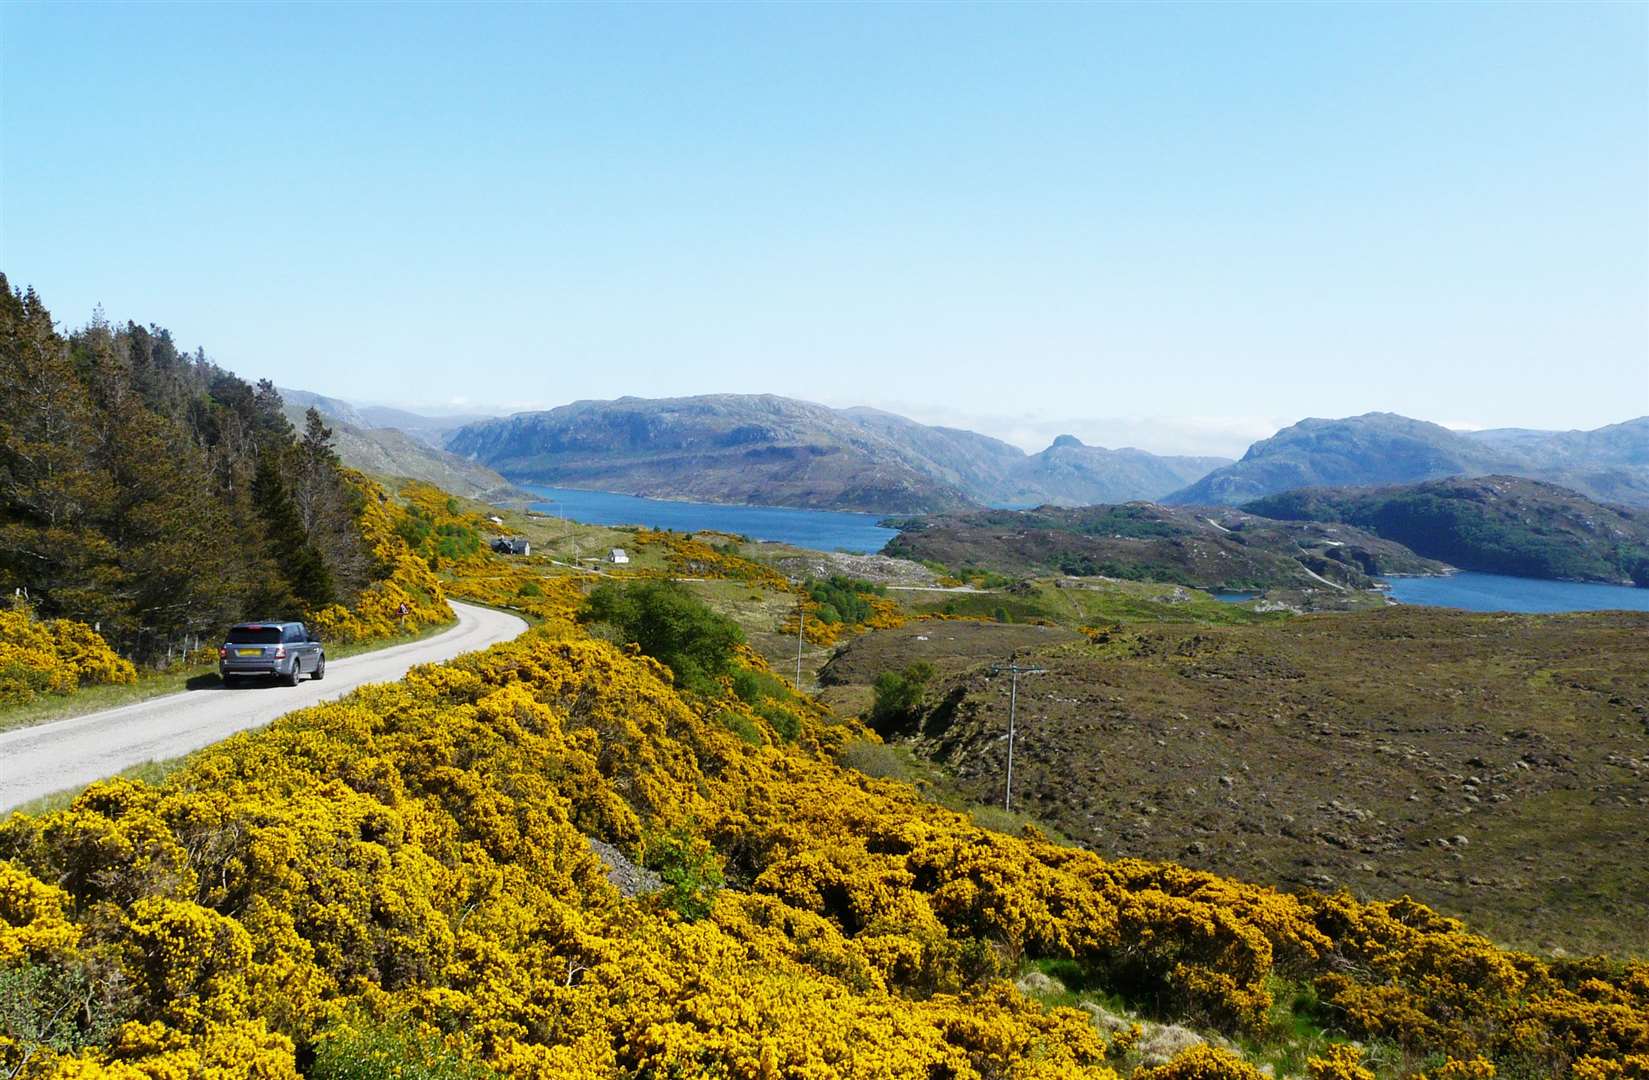 The NC500 generated almost £23 million last year